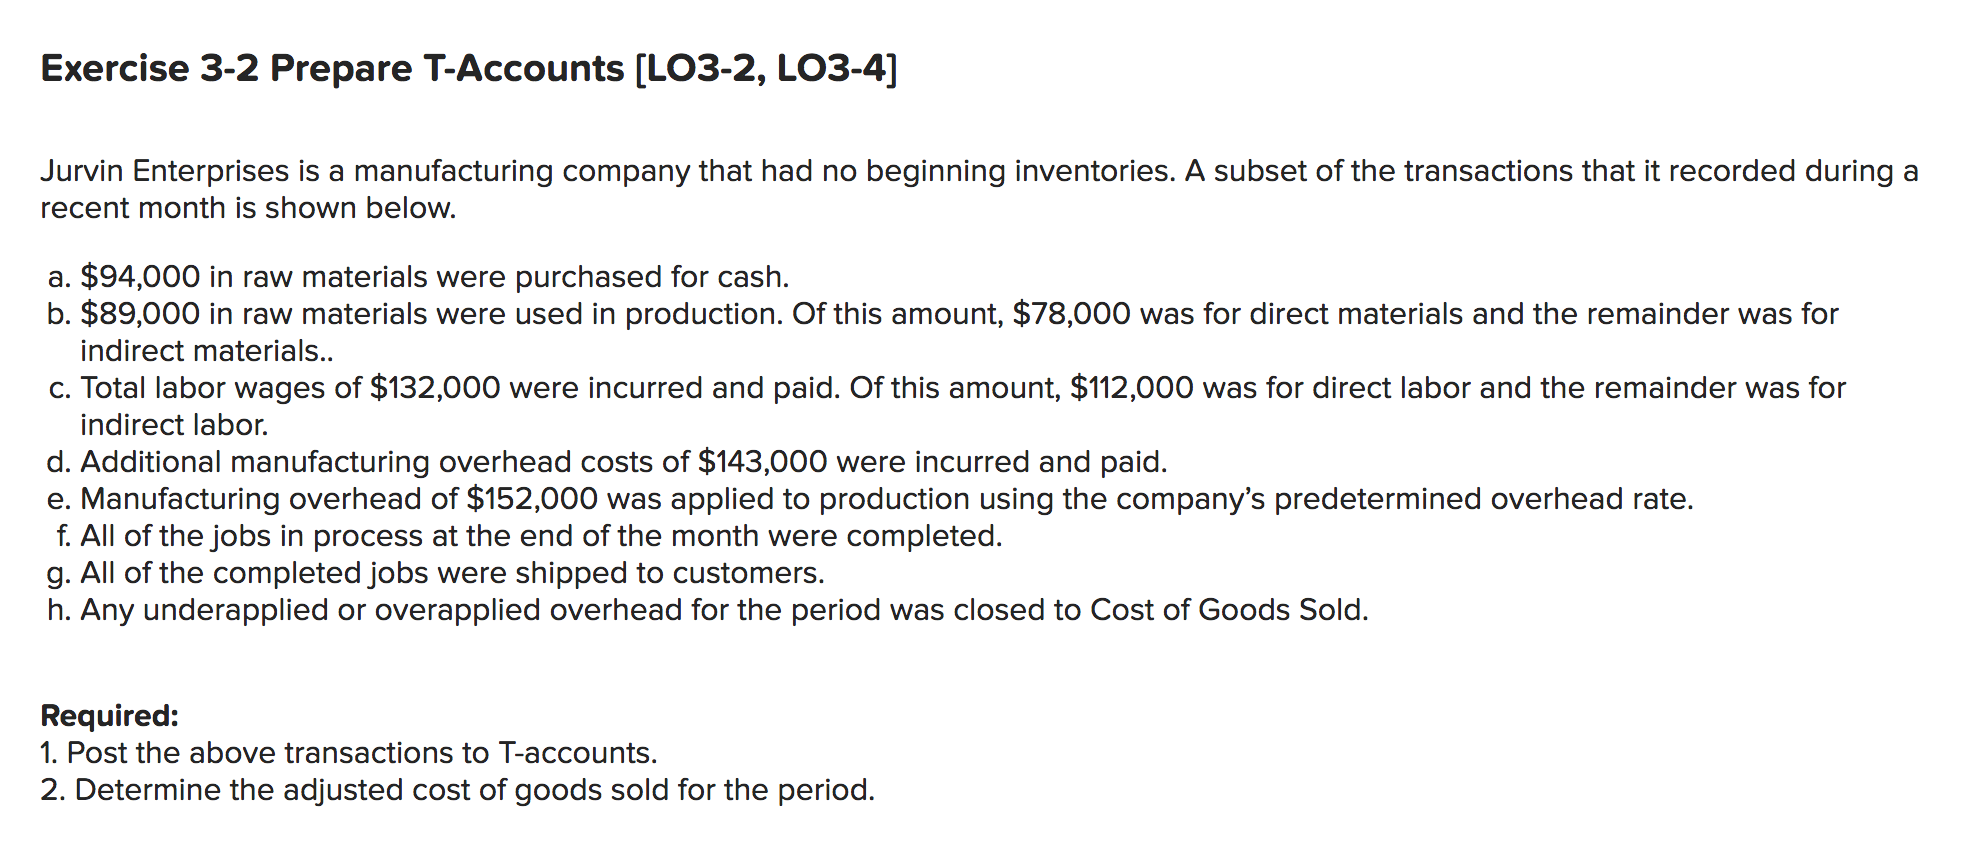 Exercise 3-2 Prepare T-Accounts [LO3-2, LO3-4]
Jurvin Enterprises is a manufacturing company that had no beginning inventories. A subset of the transactions that it recorded during a
recent month is shown below.
a. $94,000 in raw materials were purchased for cash.
b. $89,000 in raw materials were used in production. Of this amount, $78,000 was for direct materials and the remainder was for
indirect materials..
c. Total labor wages of $132,000 were incurred and paid. Of this amount, $112,000 was for direct labor and the remainder was for
indirect labor.
d. Additional manufacturing overhead costs of $143,000 were incurred and paid.
e. Manufacturing overhead of $152,000 was applied to production using the company's predetermined overhead rate.
f. All of the jobs in process at the end of the month were completed.
g. All of the completed jobs were shipped to customers.
h. Any underapplied or overapplied overhead for the period was closed to Cost of Goods Sold.
Required:
1. Post the above transactions to T-accounts.
2. Determine the adjusted cost of goods sold for the period.
